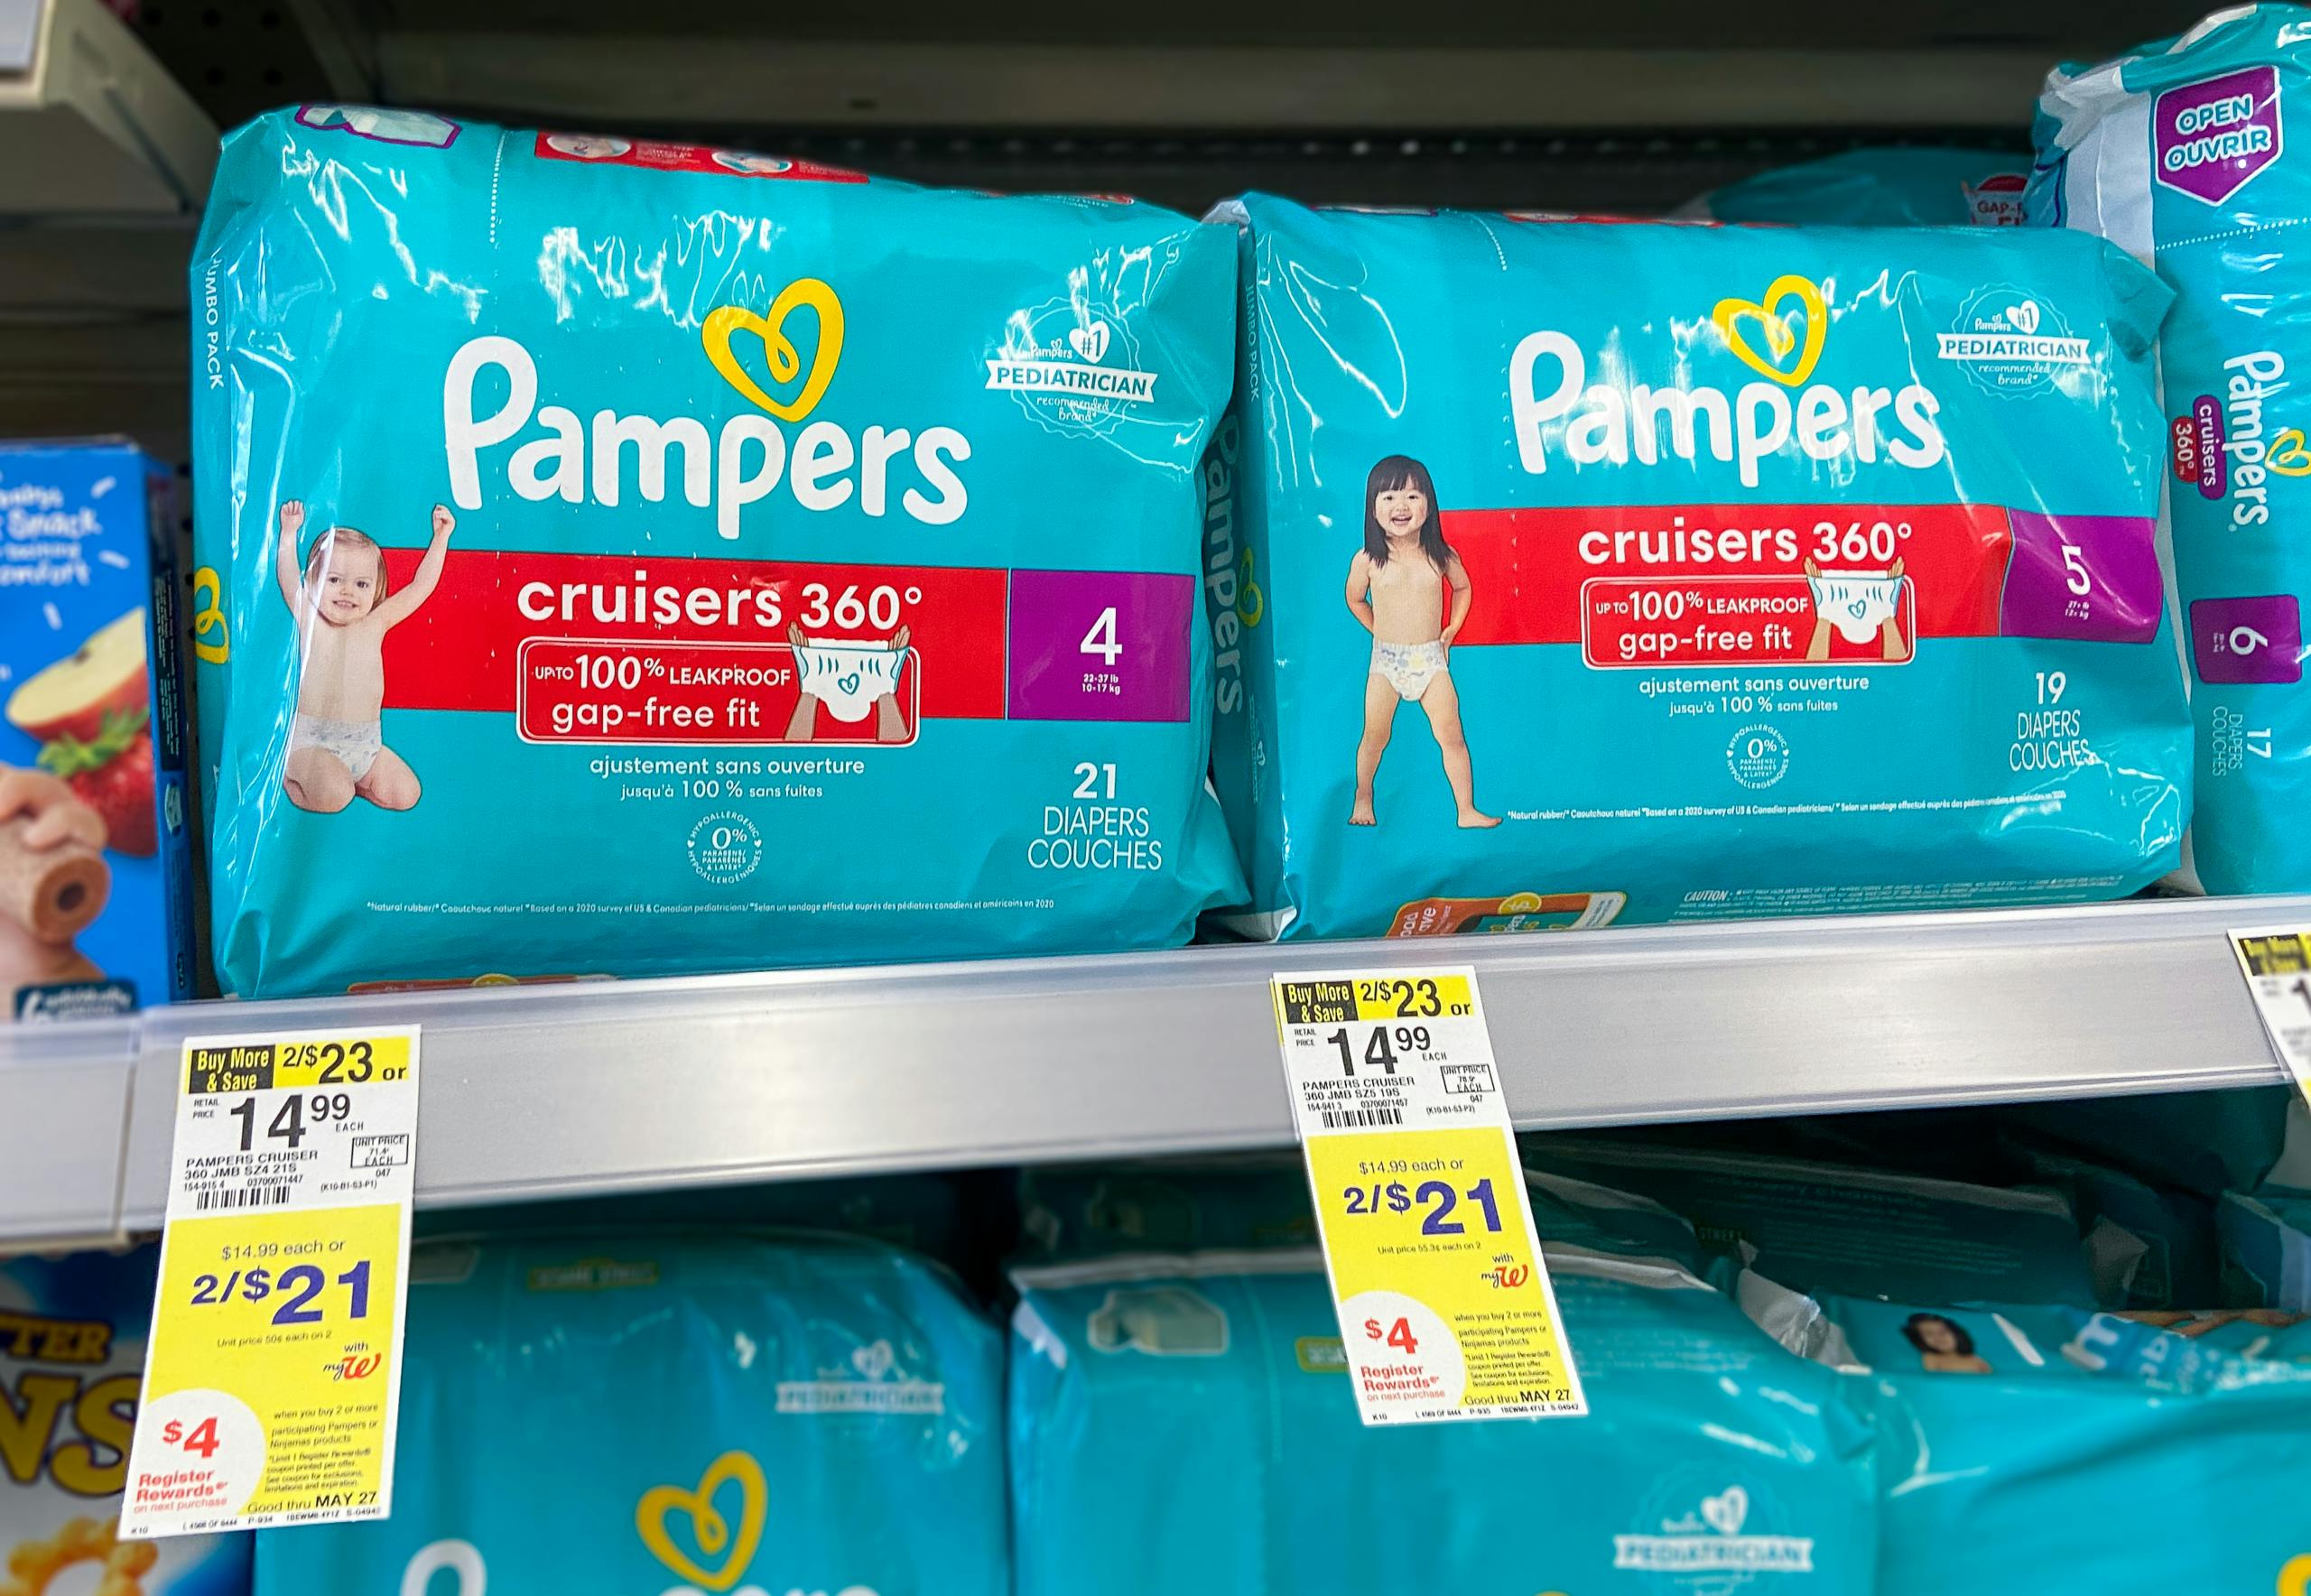 Pampers diaper packages on shelf with Walgreens sales tags